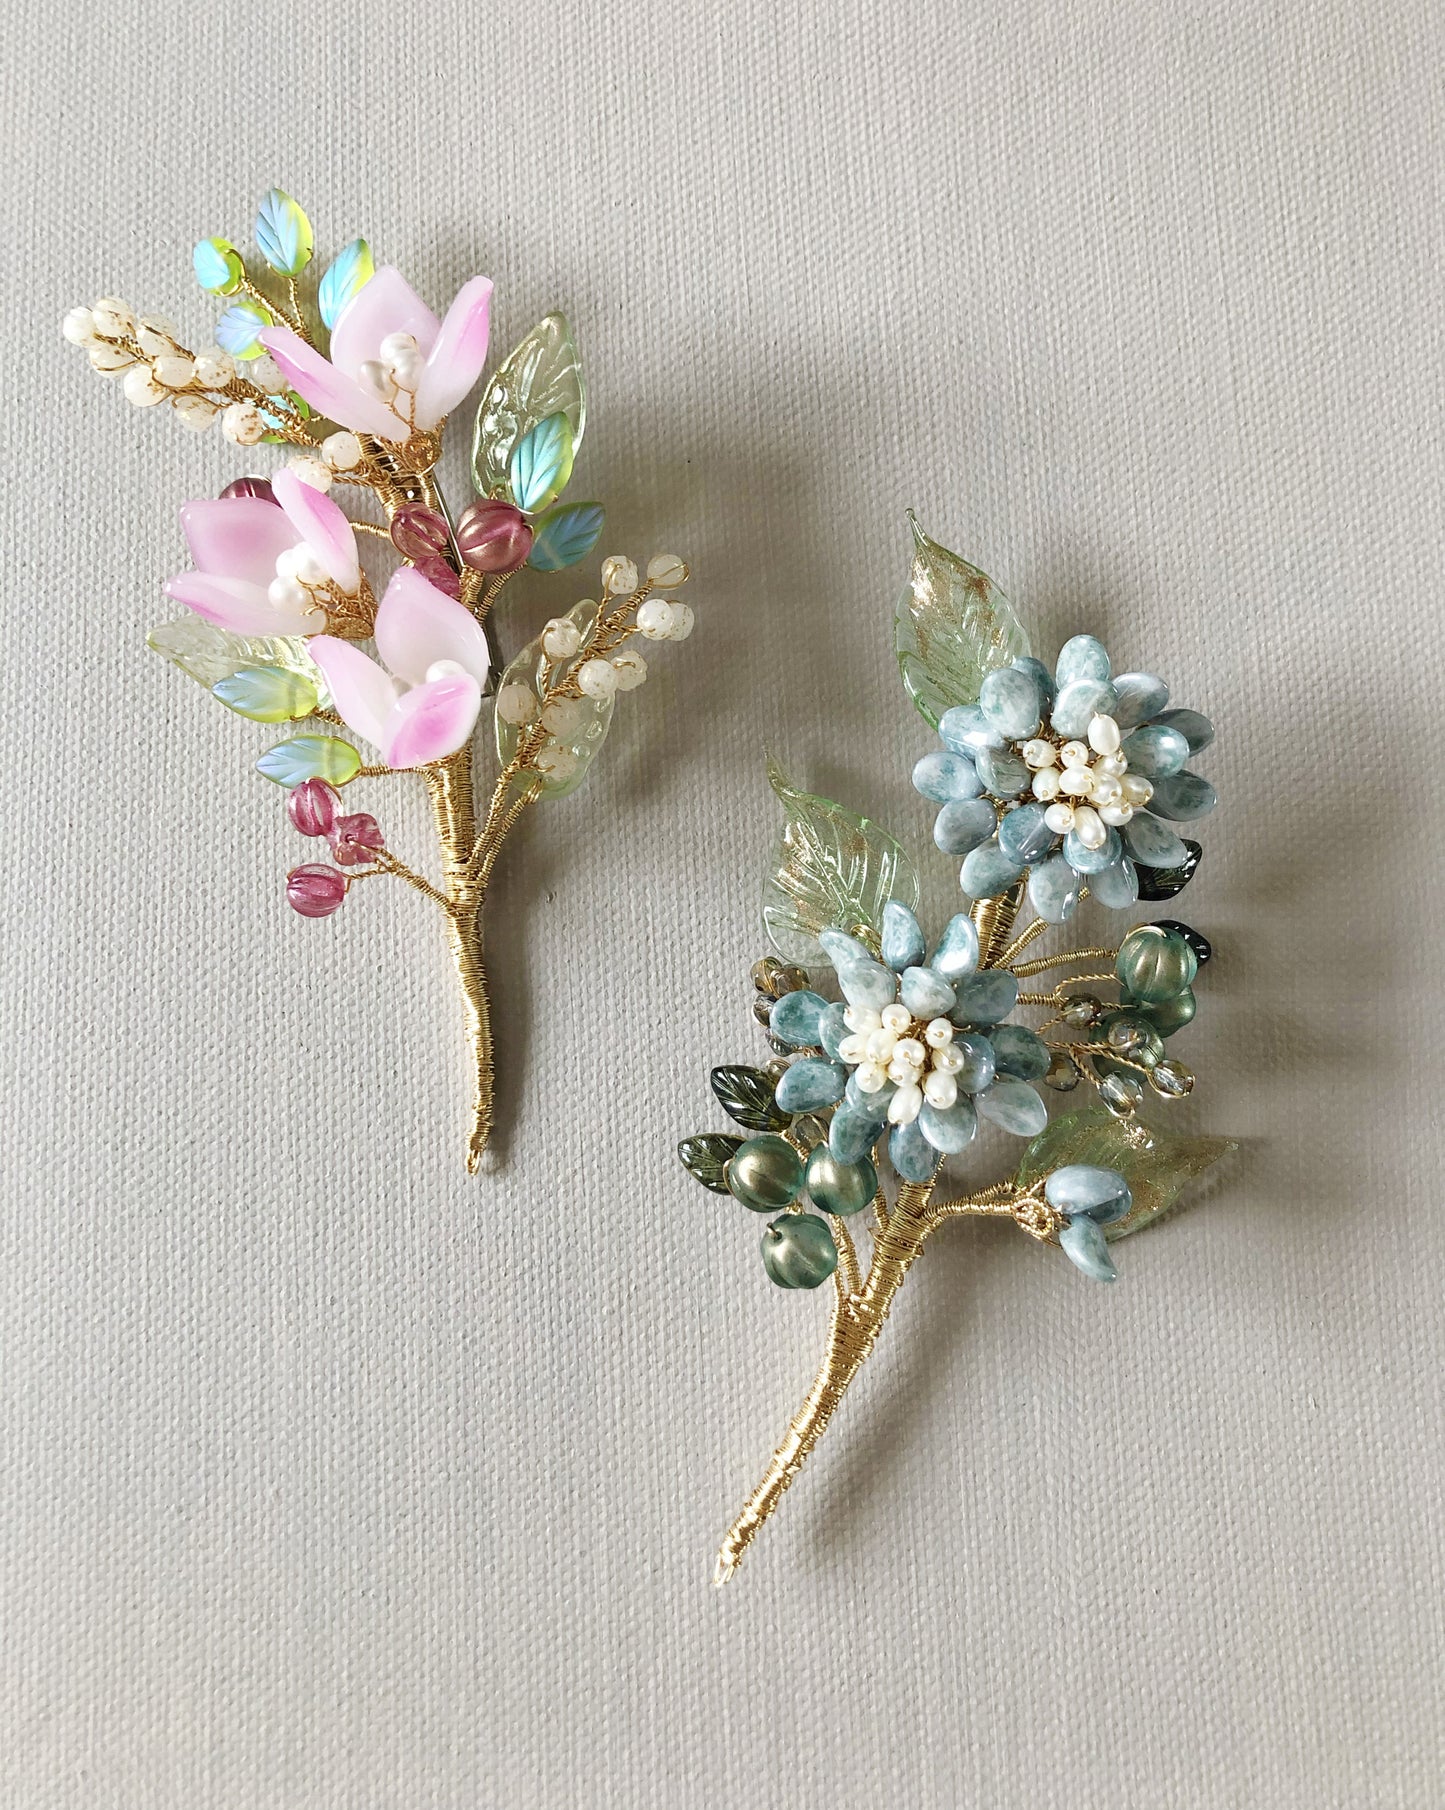 《January Palette III》Victoria’s chrysanthemum floral bouquet brooch in antique blue